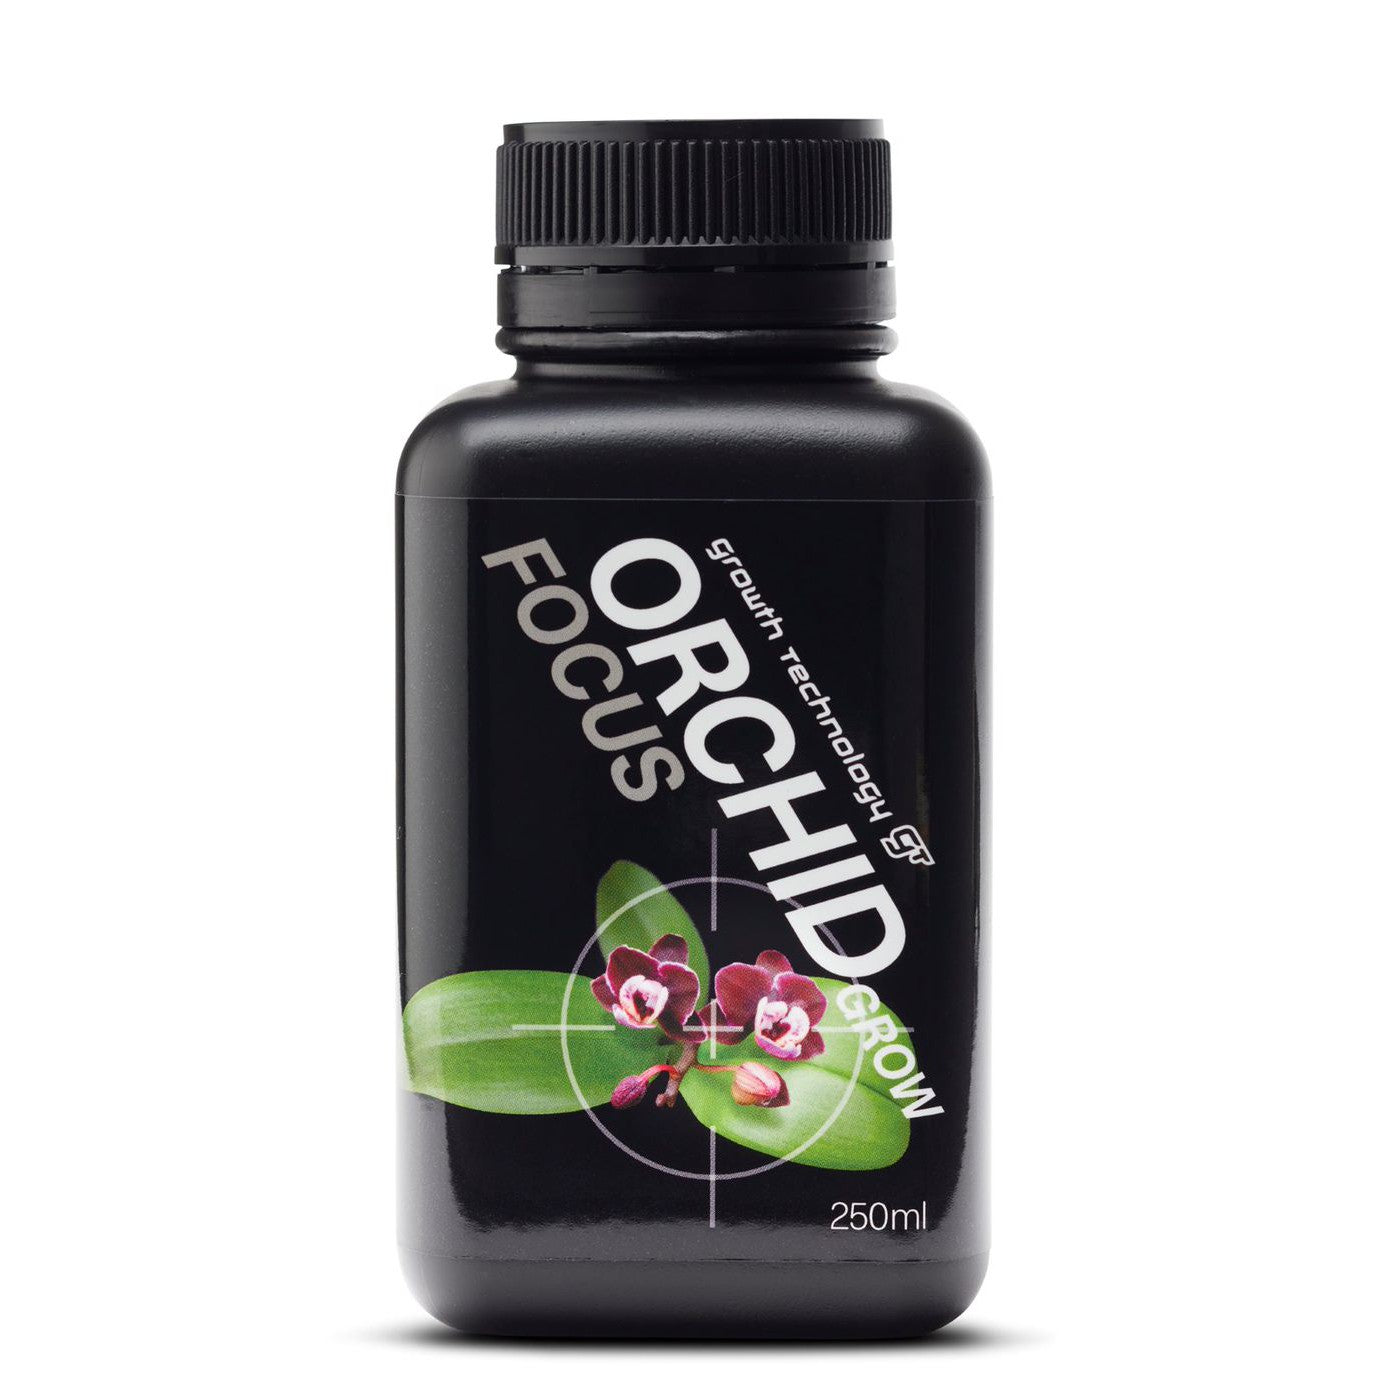 GT Orchid Grow Focus Nutrient Concentrate for Orchids - Hydroponic Solutions